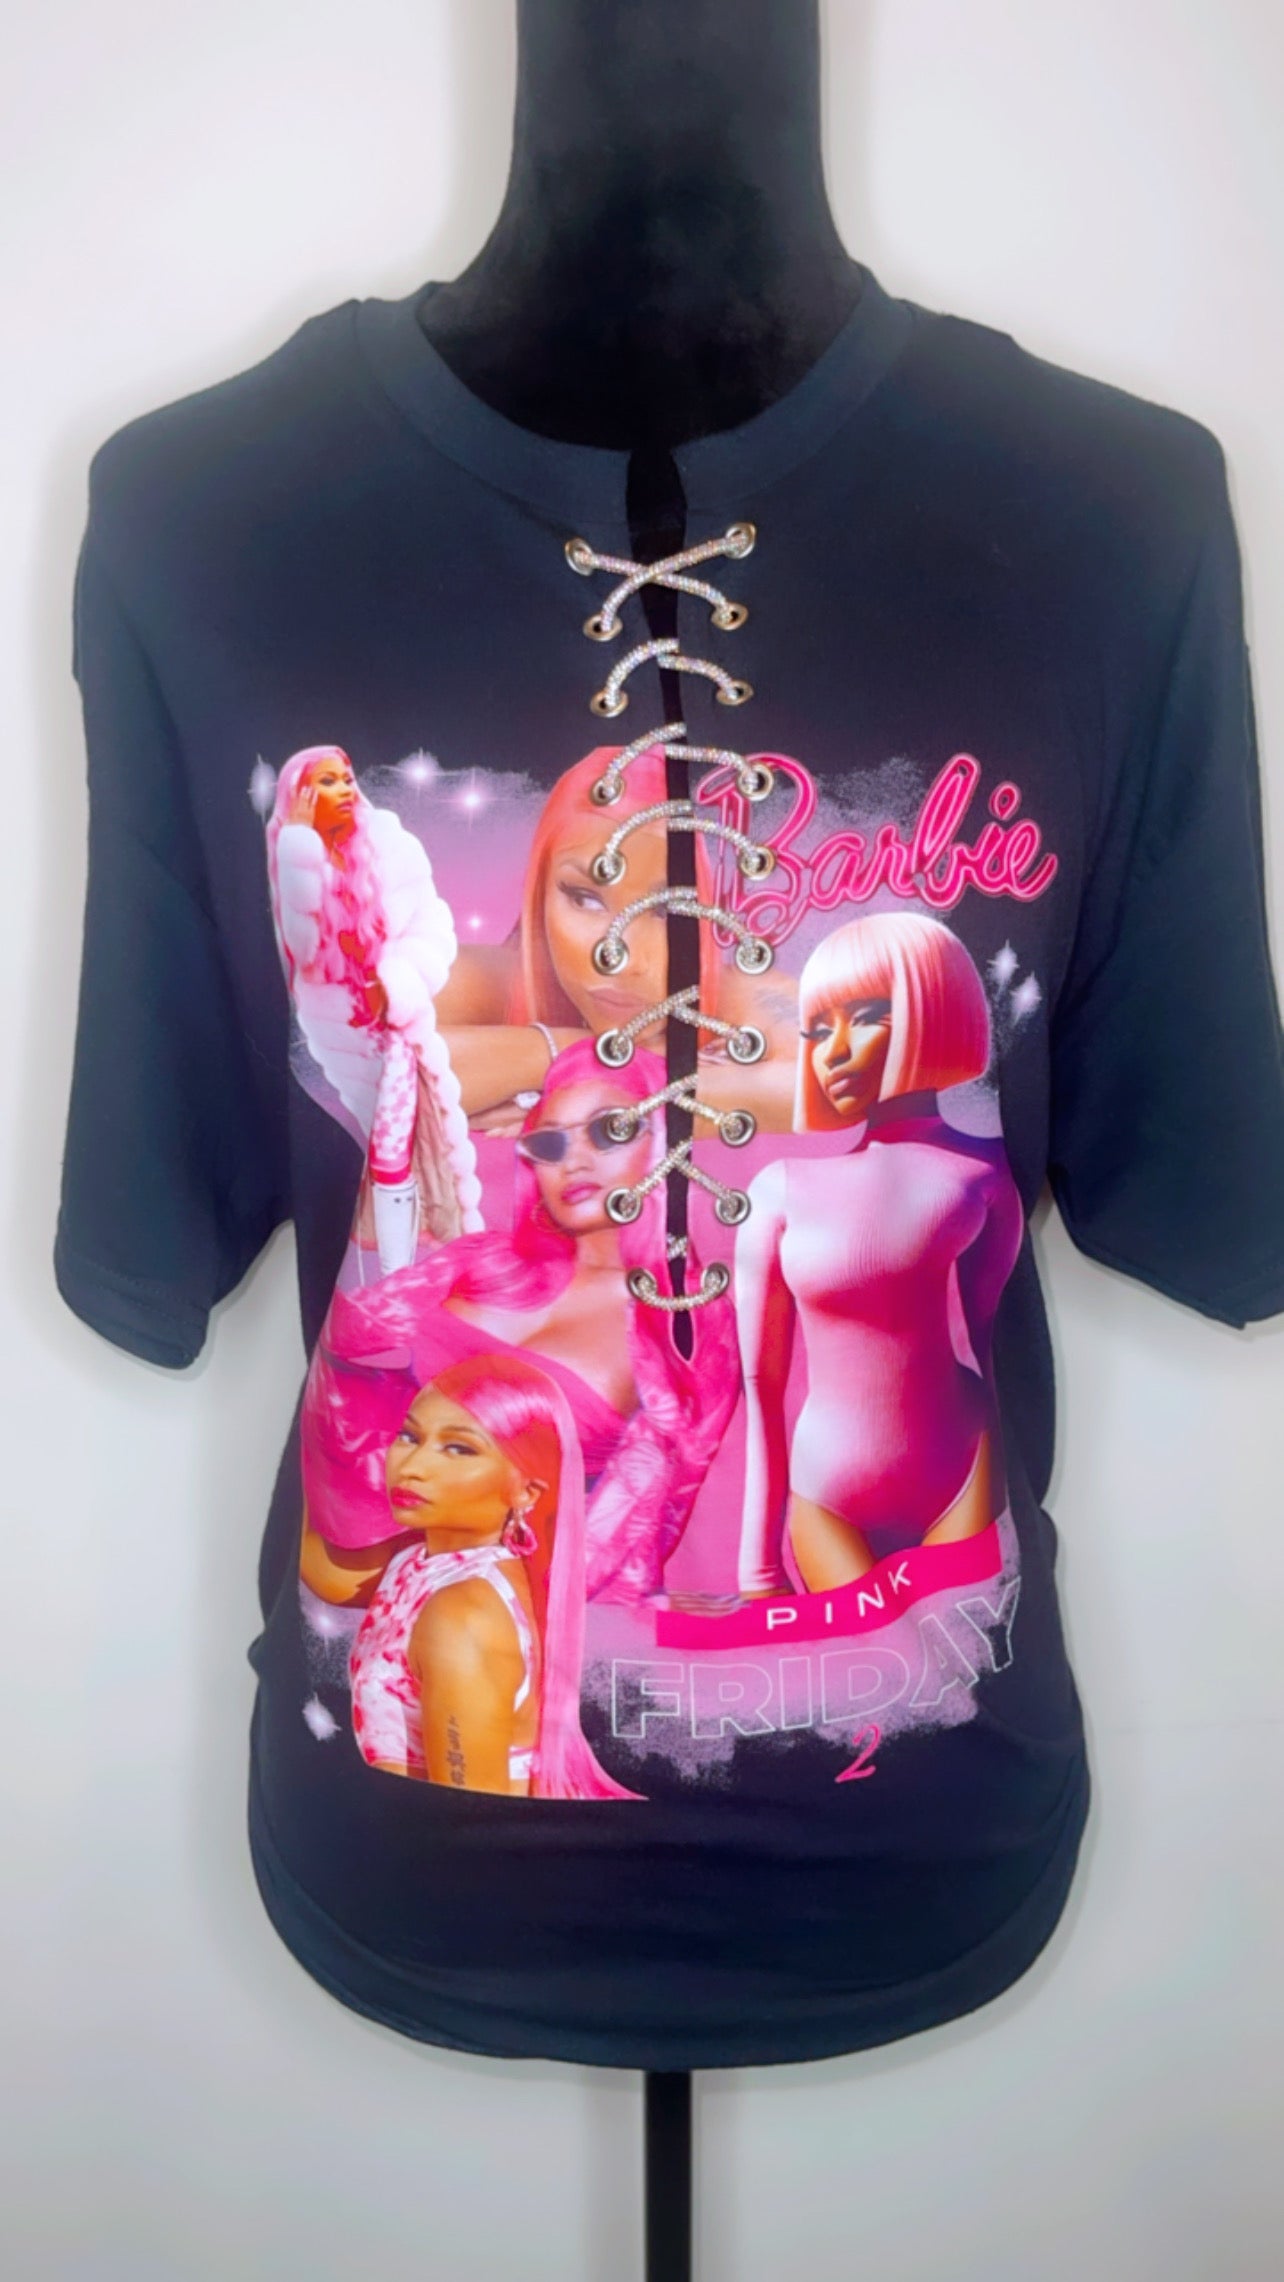 Pink Friday 2 - Barbie (Women’s Small)